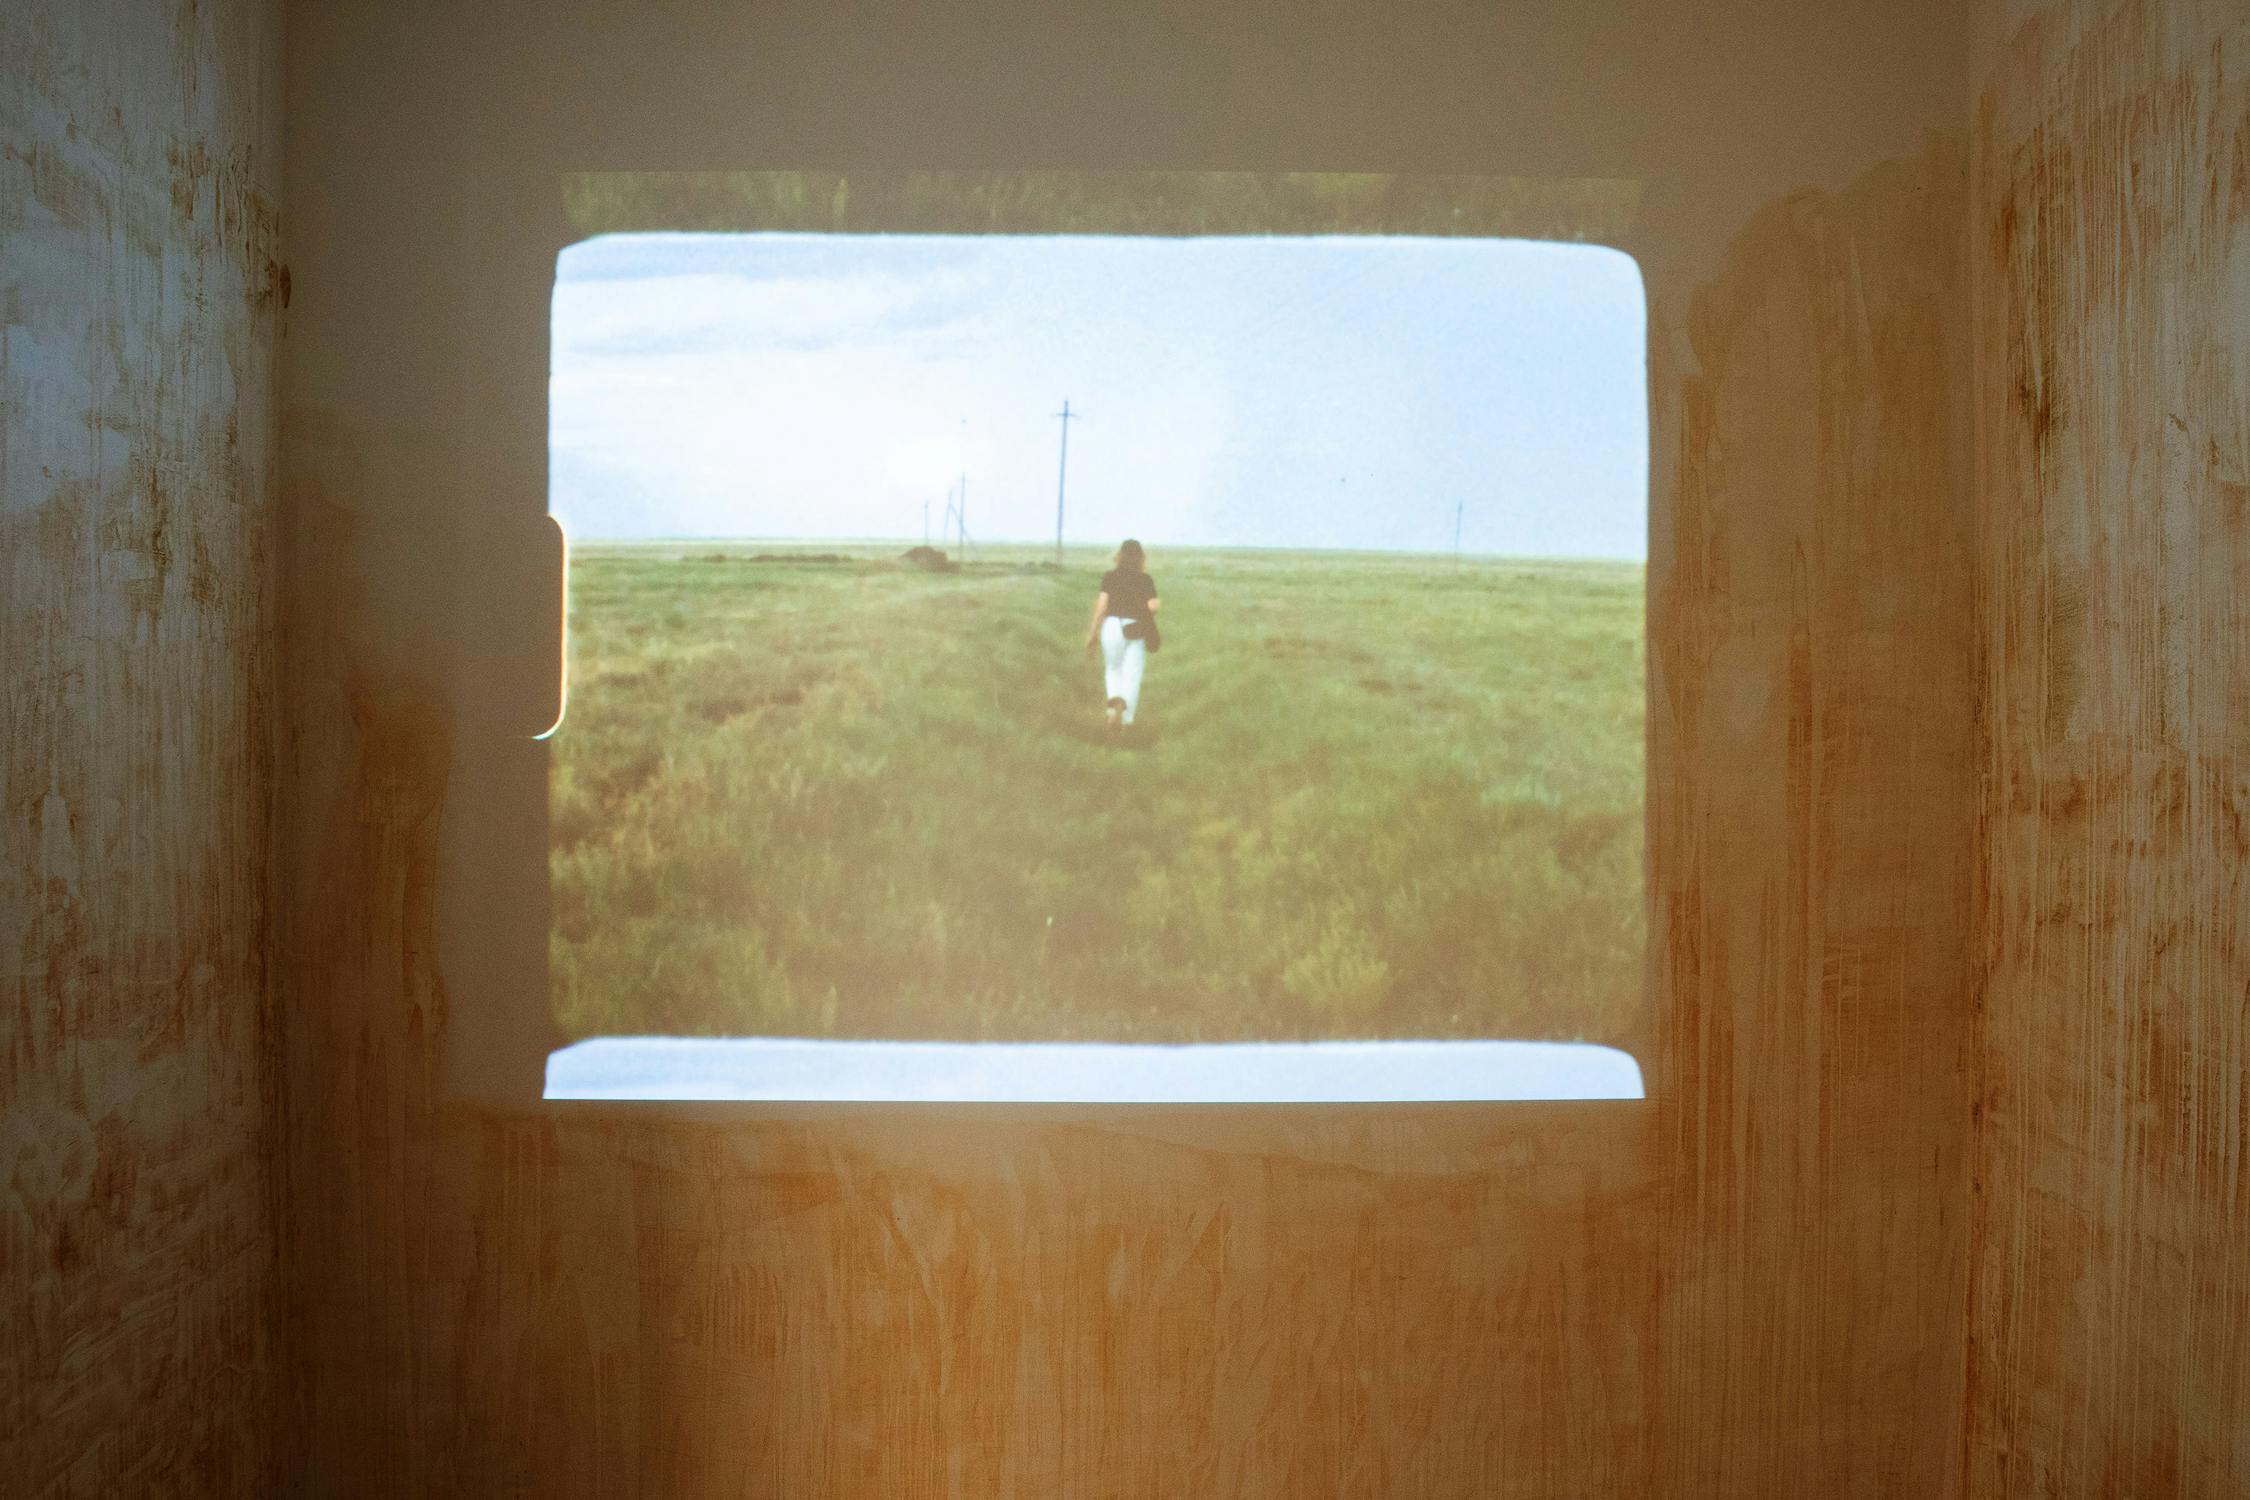 The project studio showing a still from The Friendship Garden film, with a woman walking through long grass